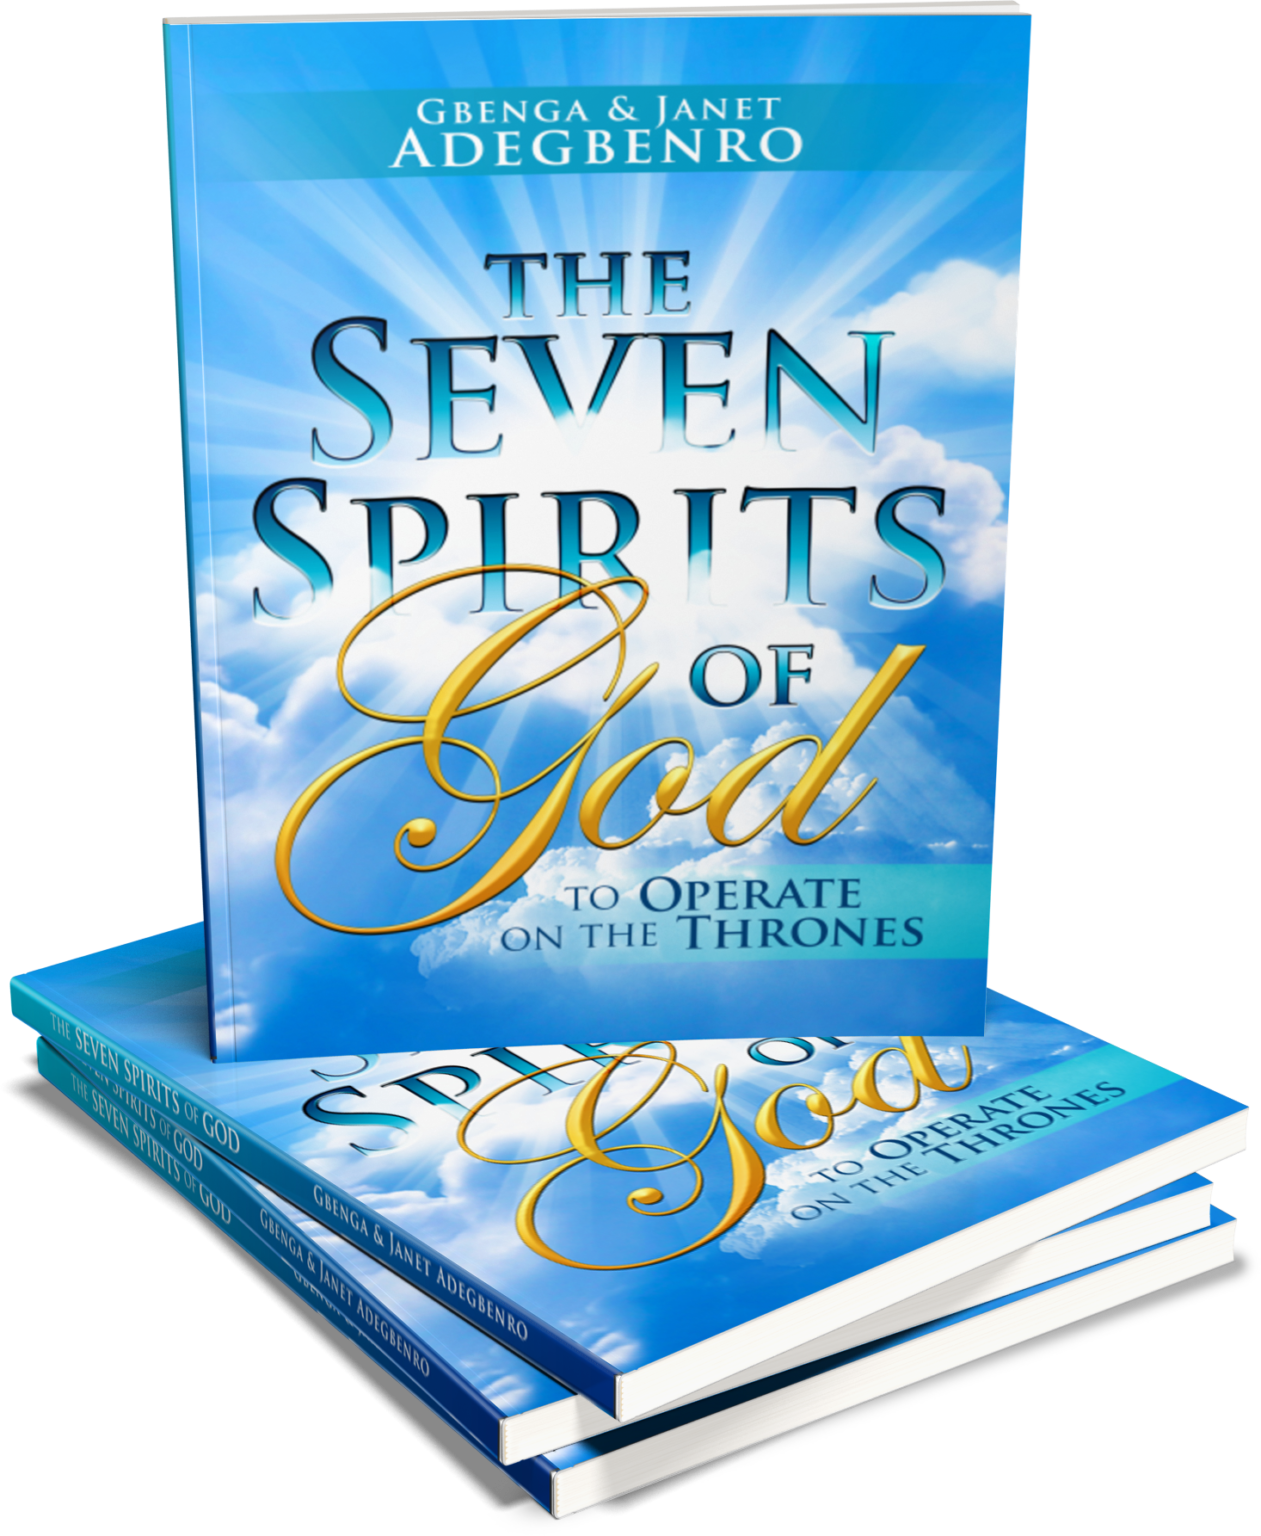 functions of the seven spirits of god